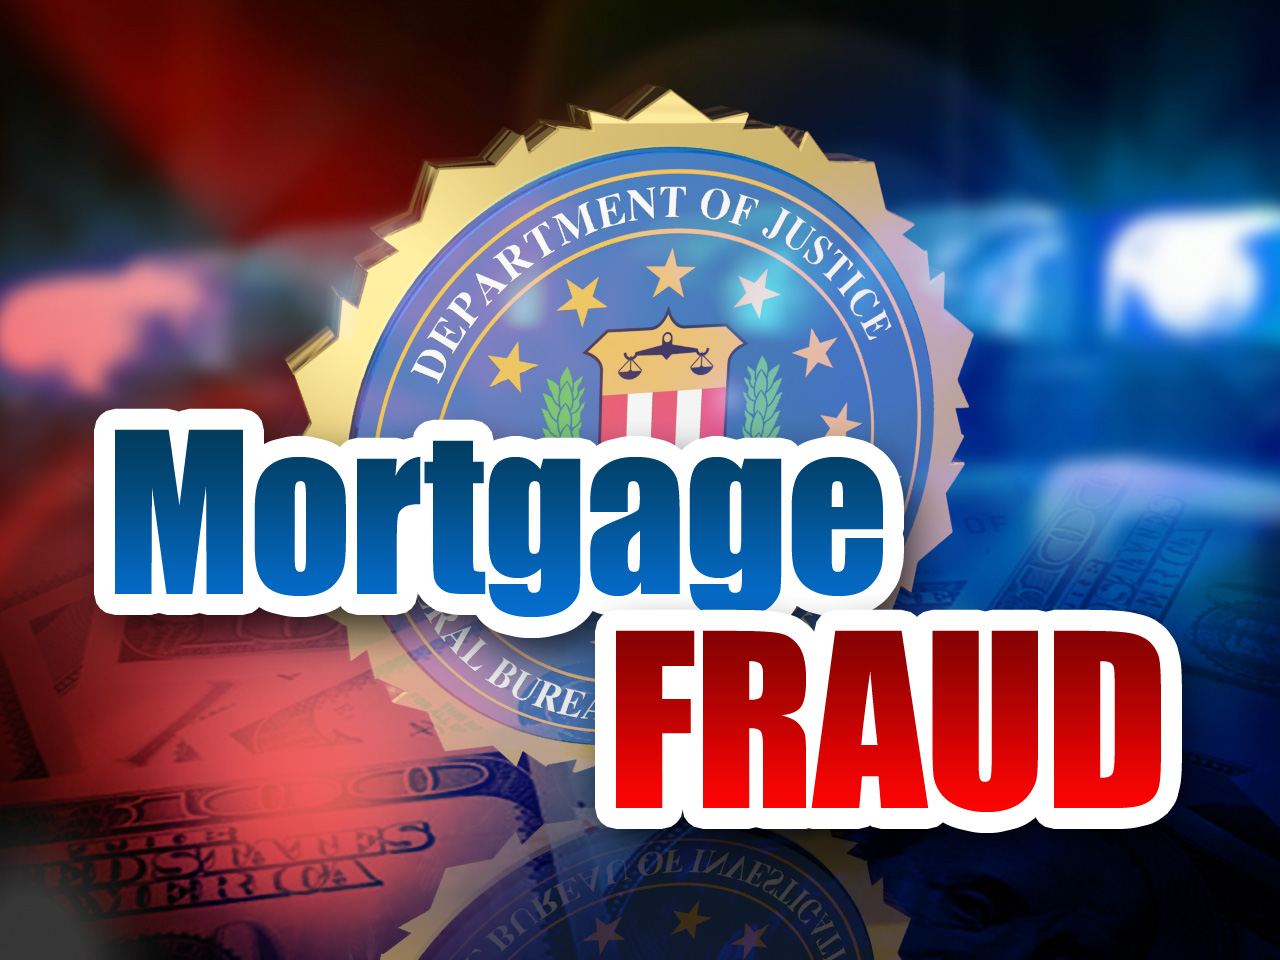 Mortgage Fraud Example and Review